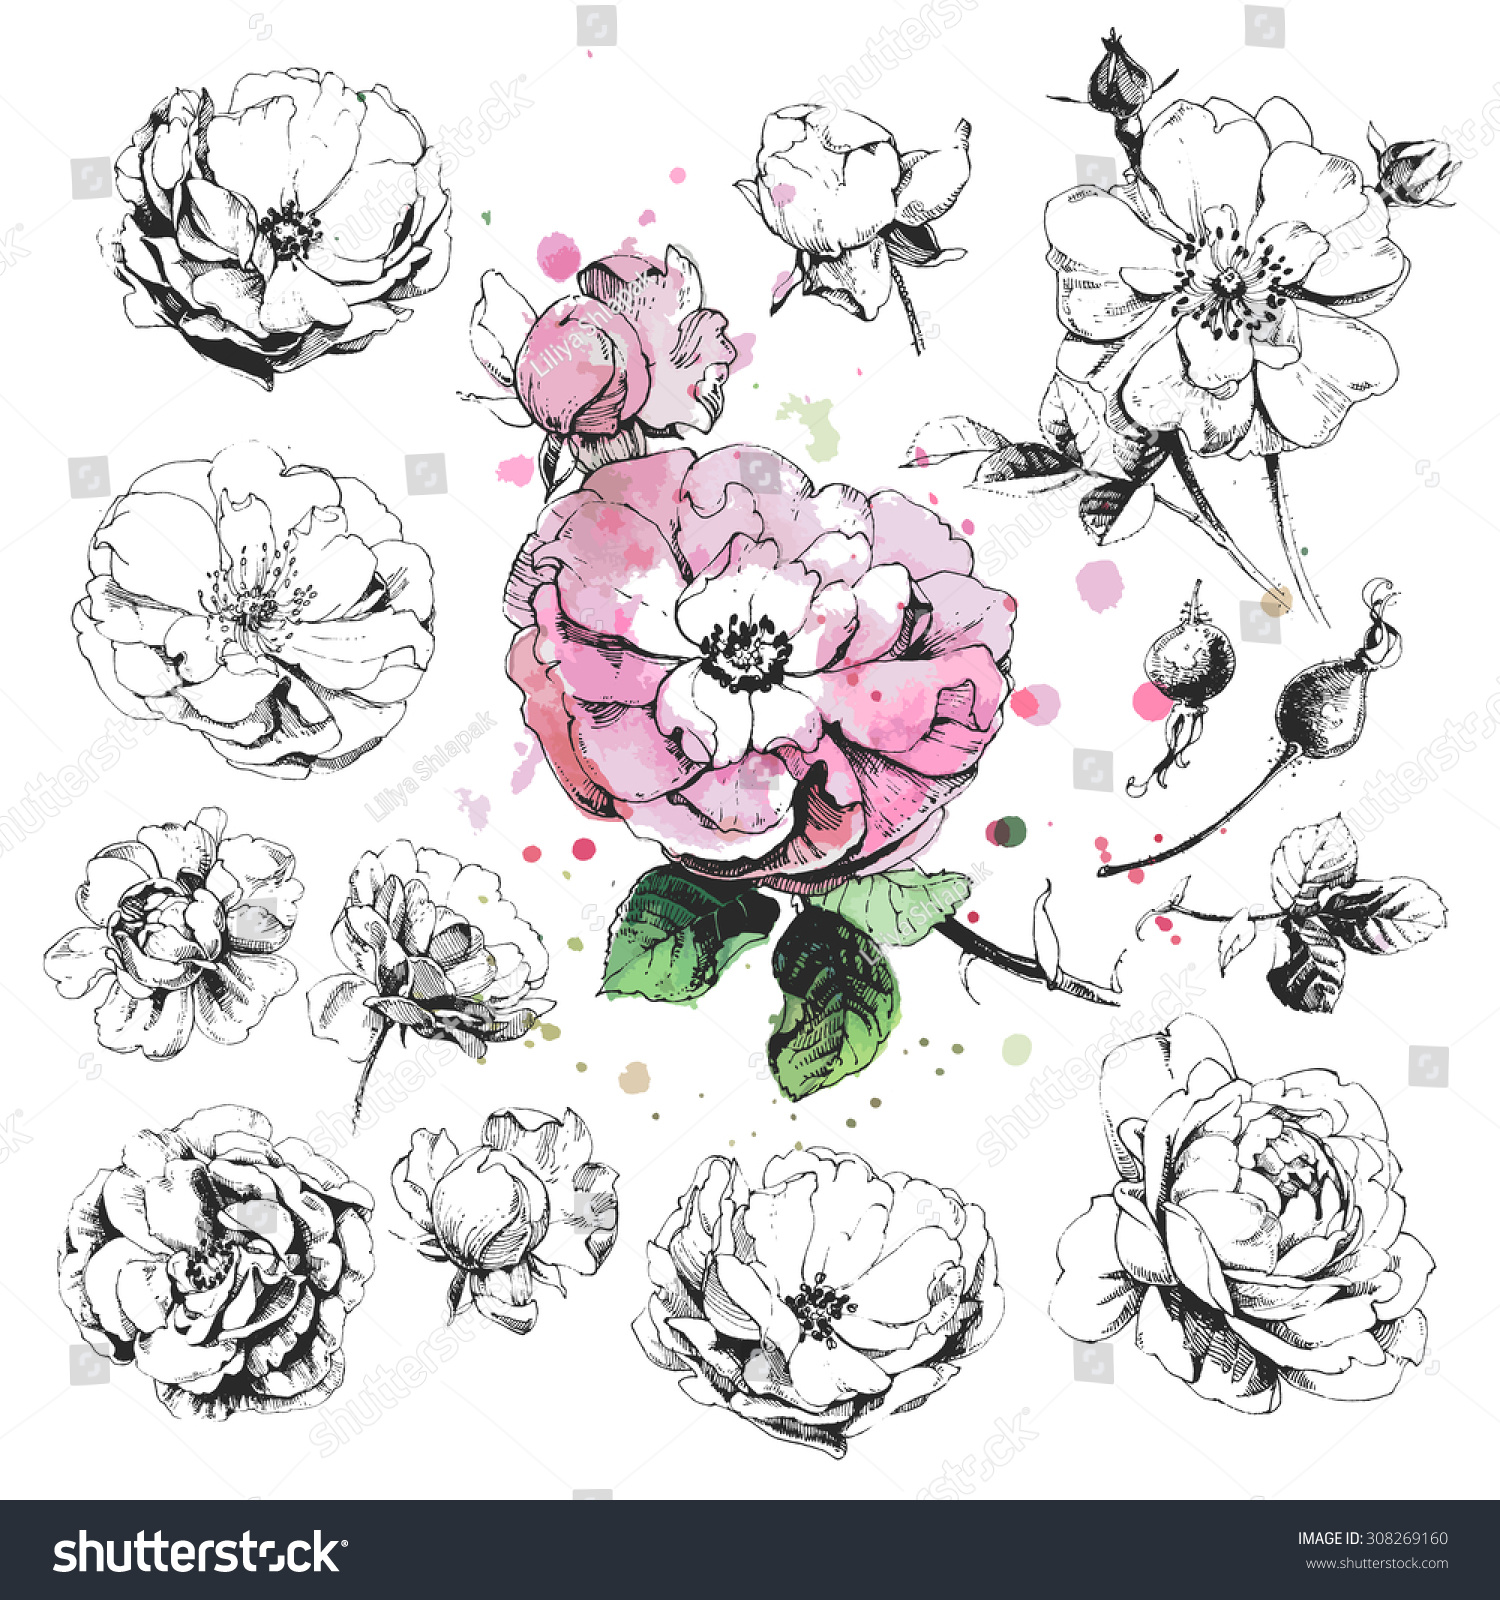 Hand drawn illustrations of wild rose flowers isolated on white background #308269160